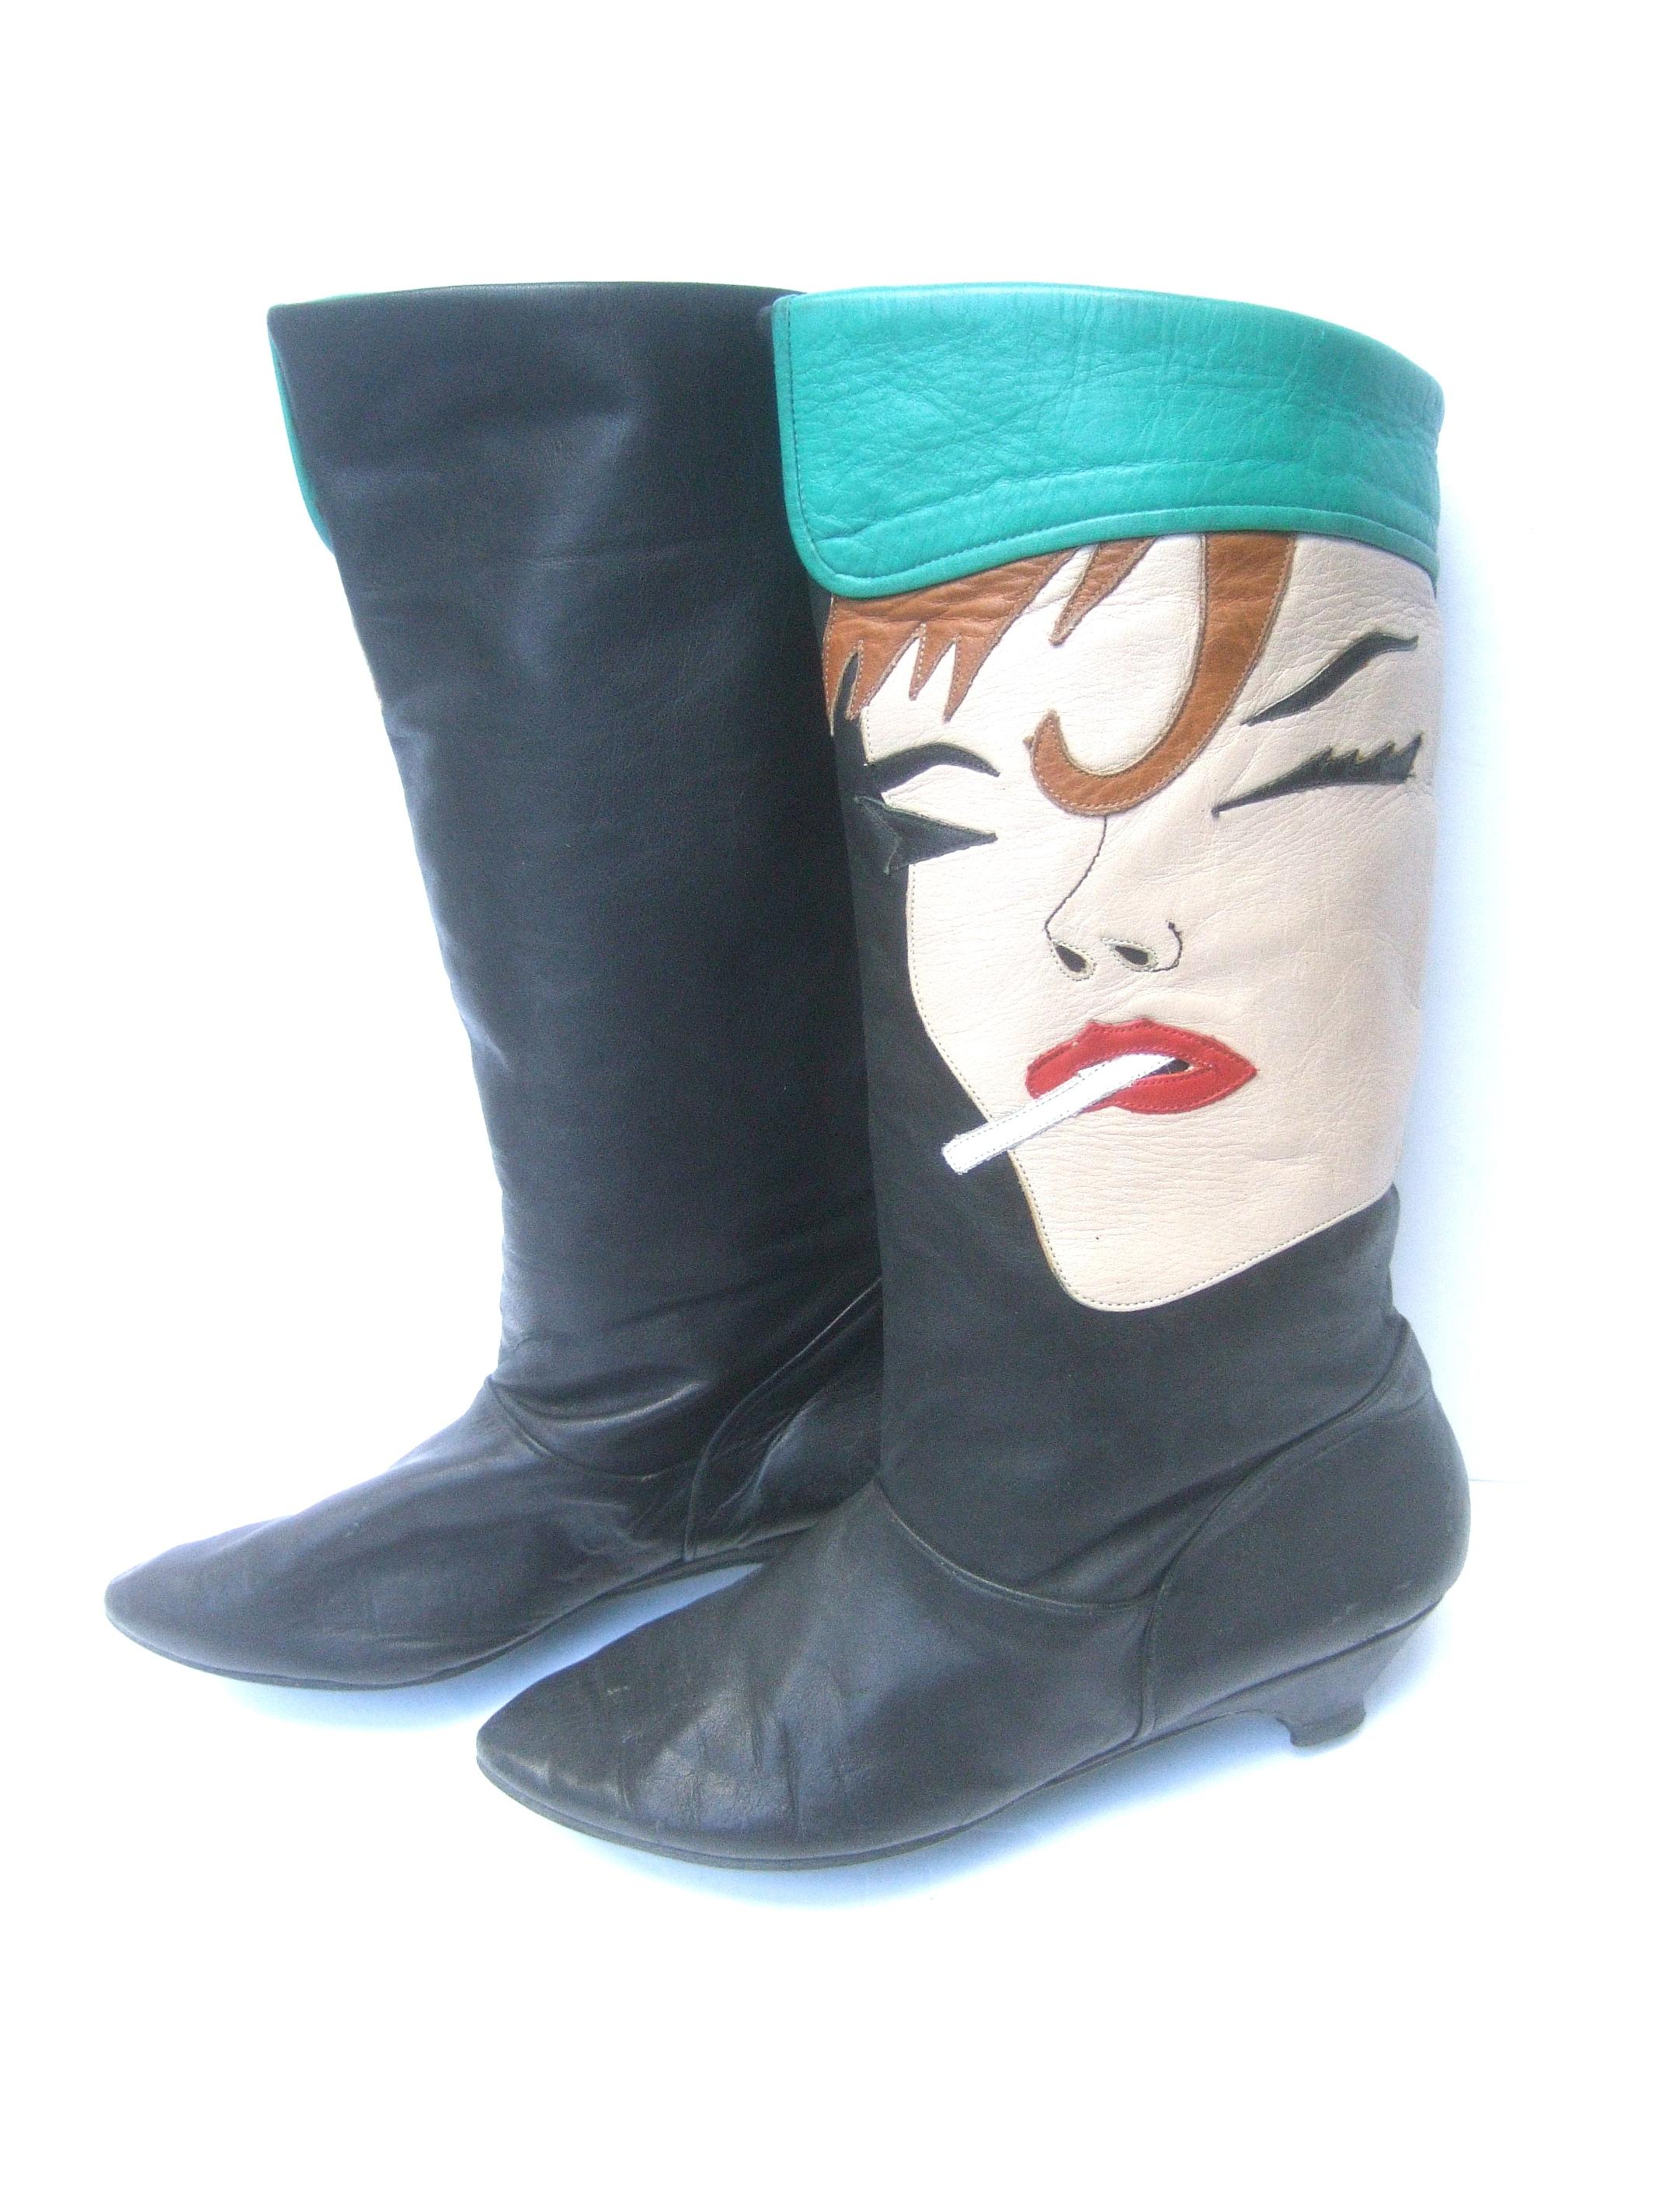 Mod Edgy Pop Art Leather Boots Designed by Zalo c 1980s 4